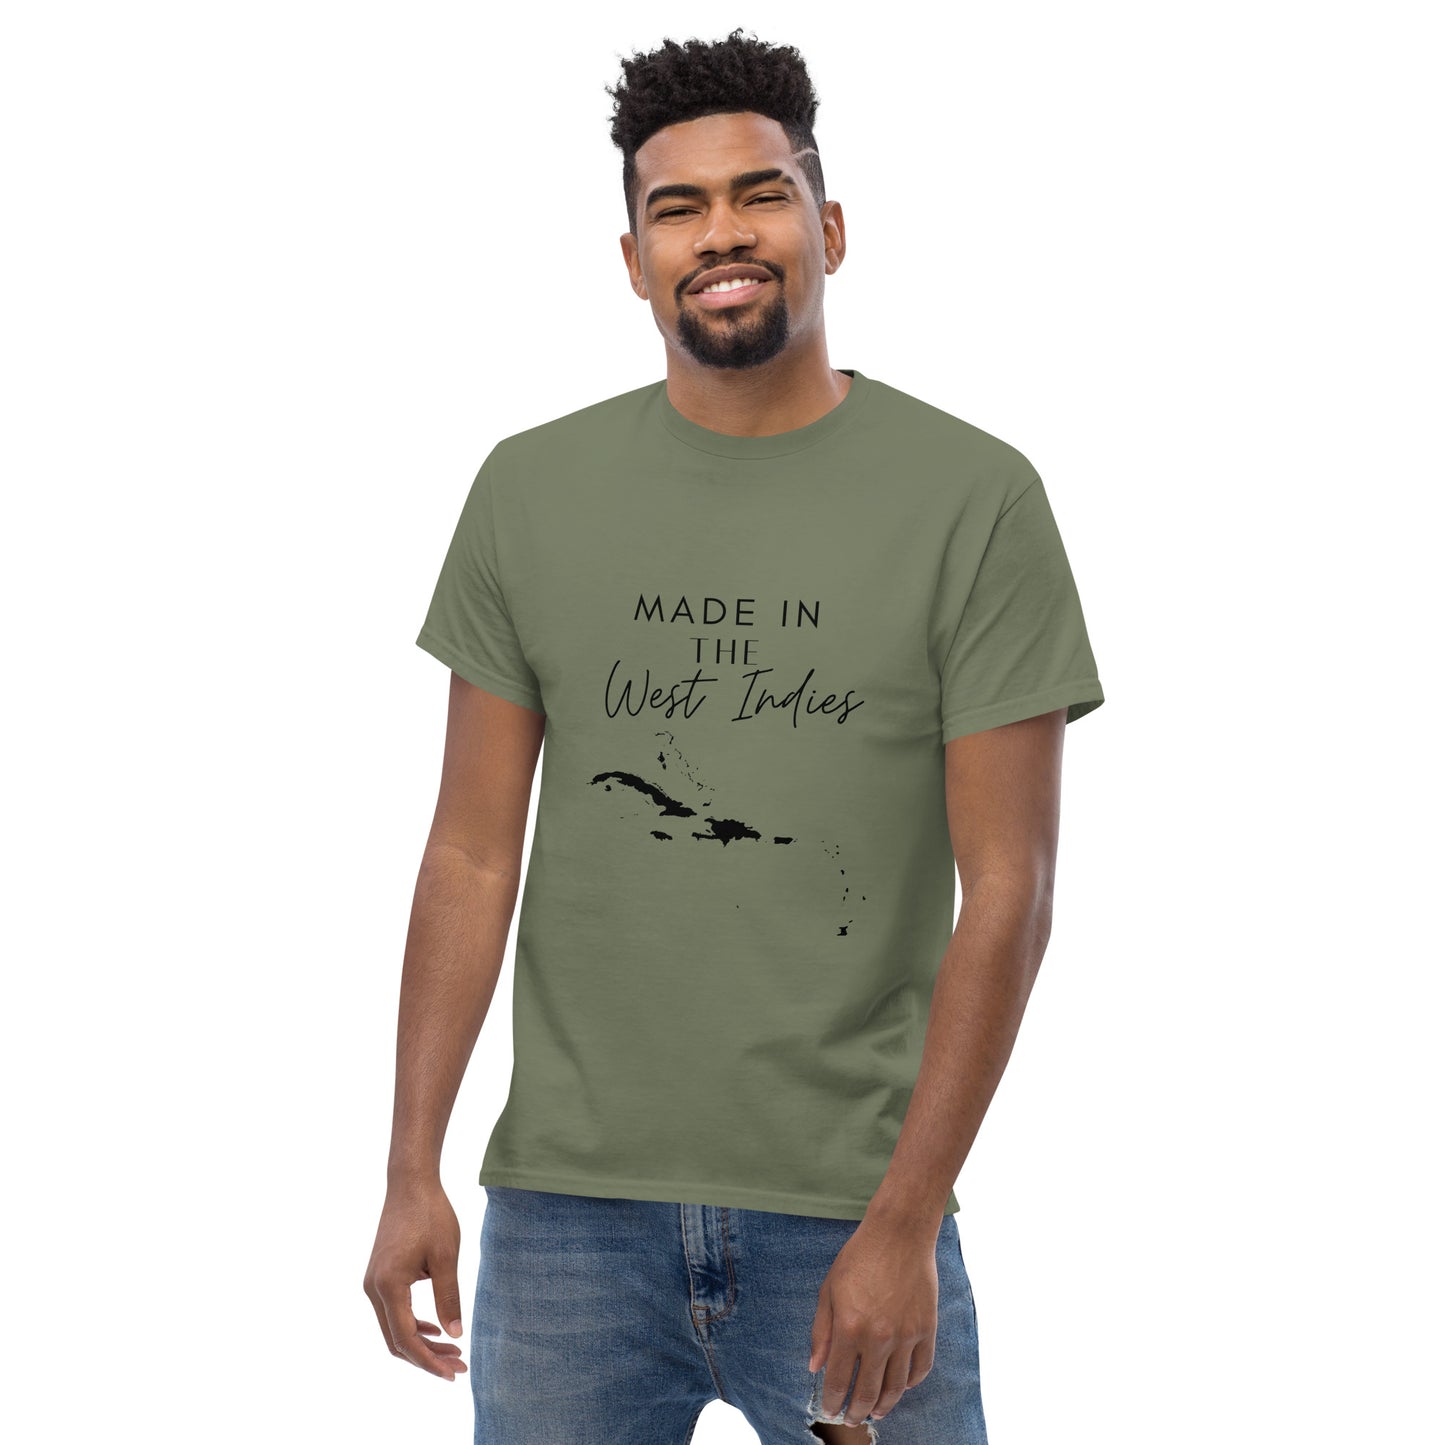 Made in the West Indies Men's T-shirt